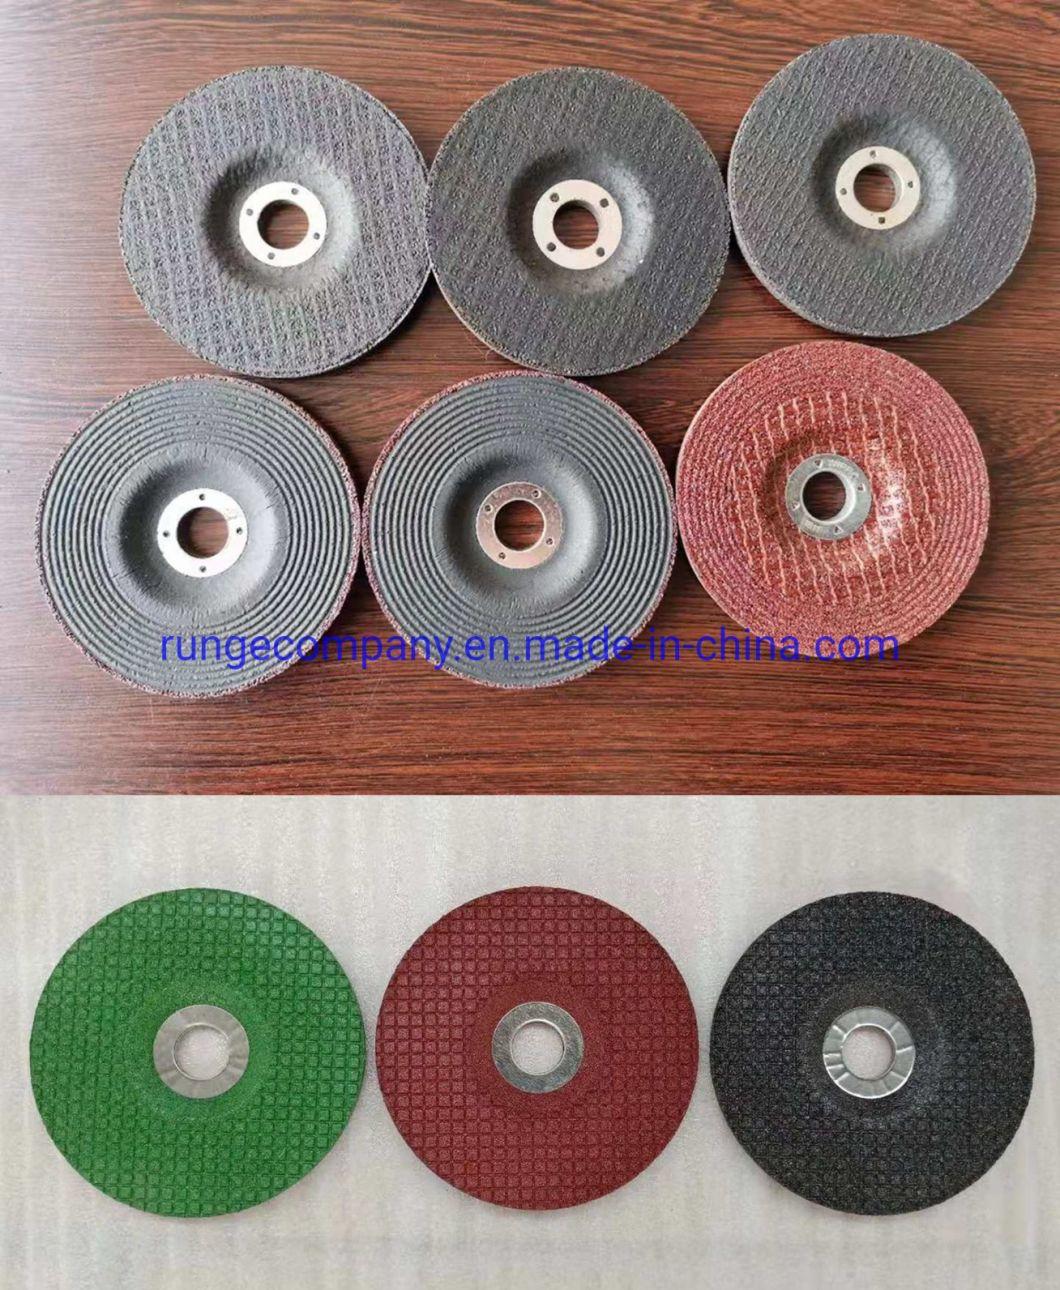 Electric Power Tools Accessories 4.5" Grinding Wheel for Grinders Grind All Steel and Metal Including Welds, Carbon Steel, Structural Steel, Iron, Steel Pipe